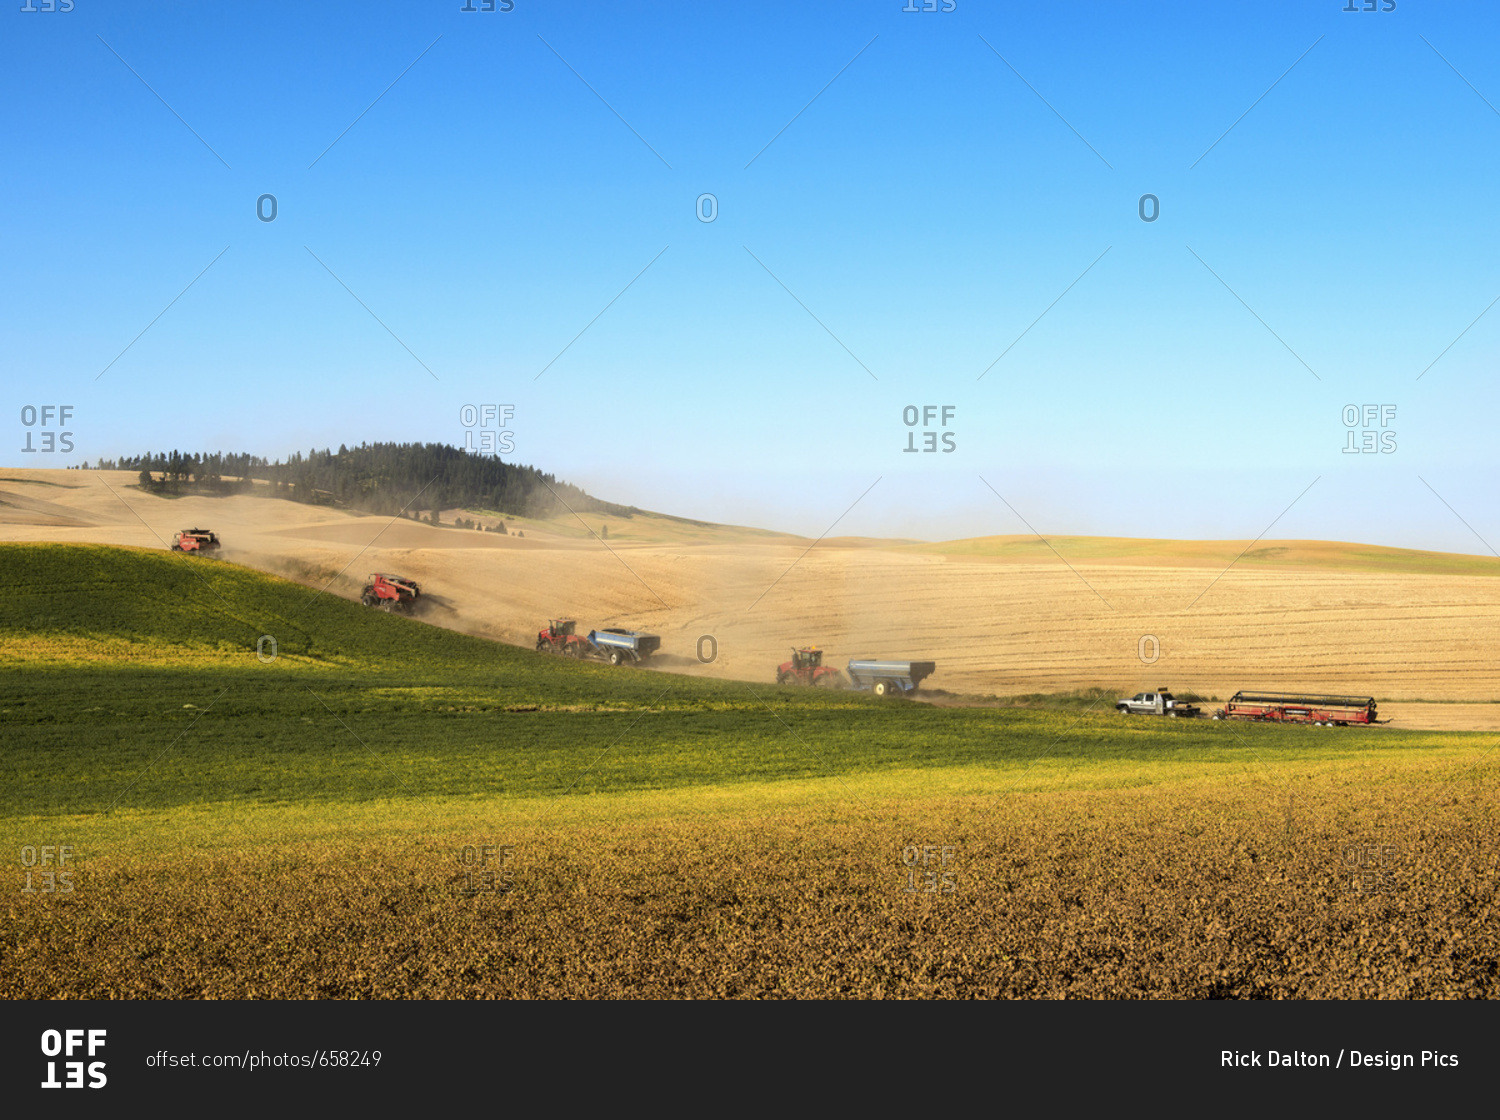 Harvesting A Crop On Fields Against A Blue Sky; Washington, United States Of America